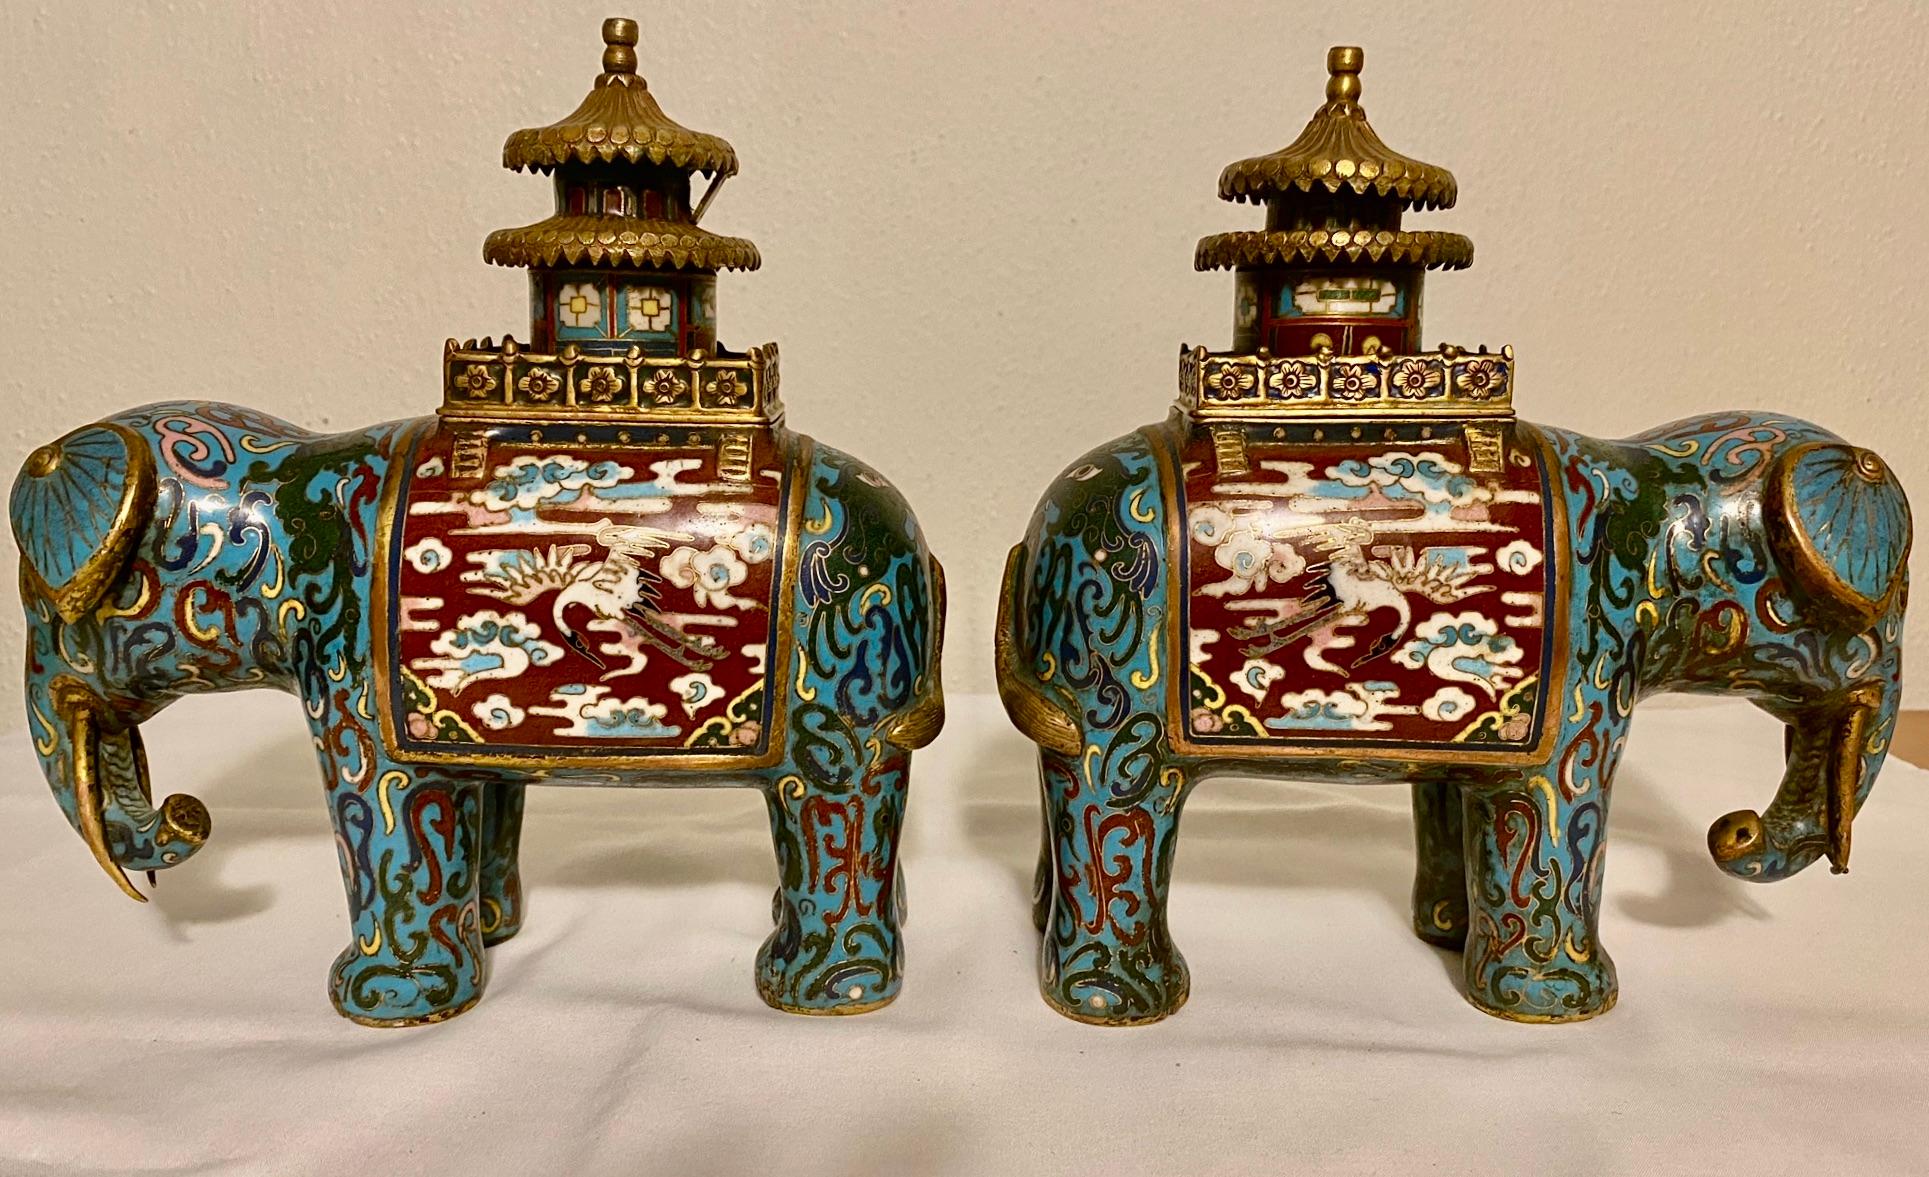 Pair of cloisonné incense burners in the form of elephants. The howdahs on the elephants backs are removable and the incense was placed inside. The howdah was used by wealthy people during processions, hunting or even warfare. The base is a deep